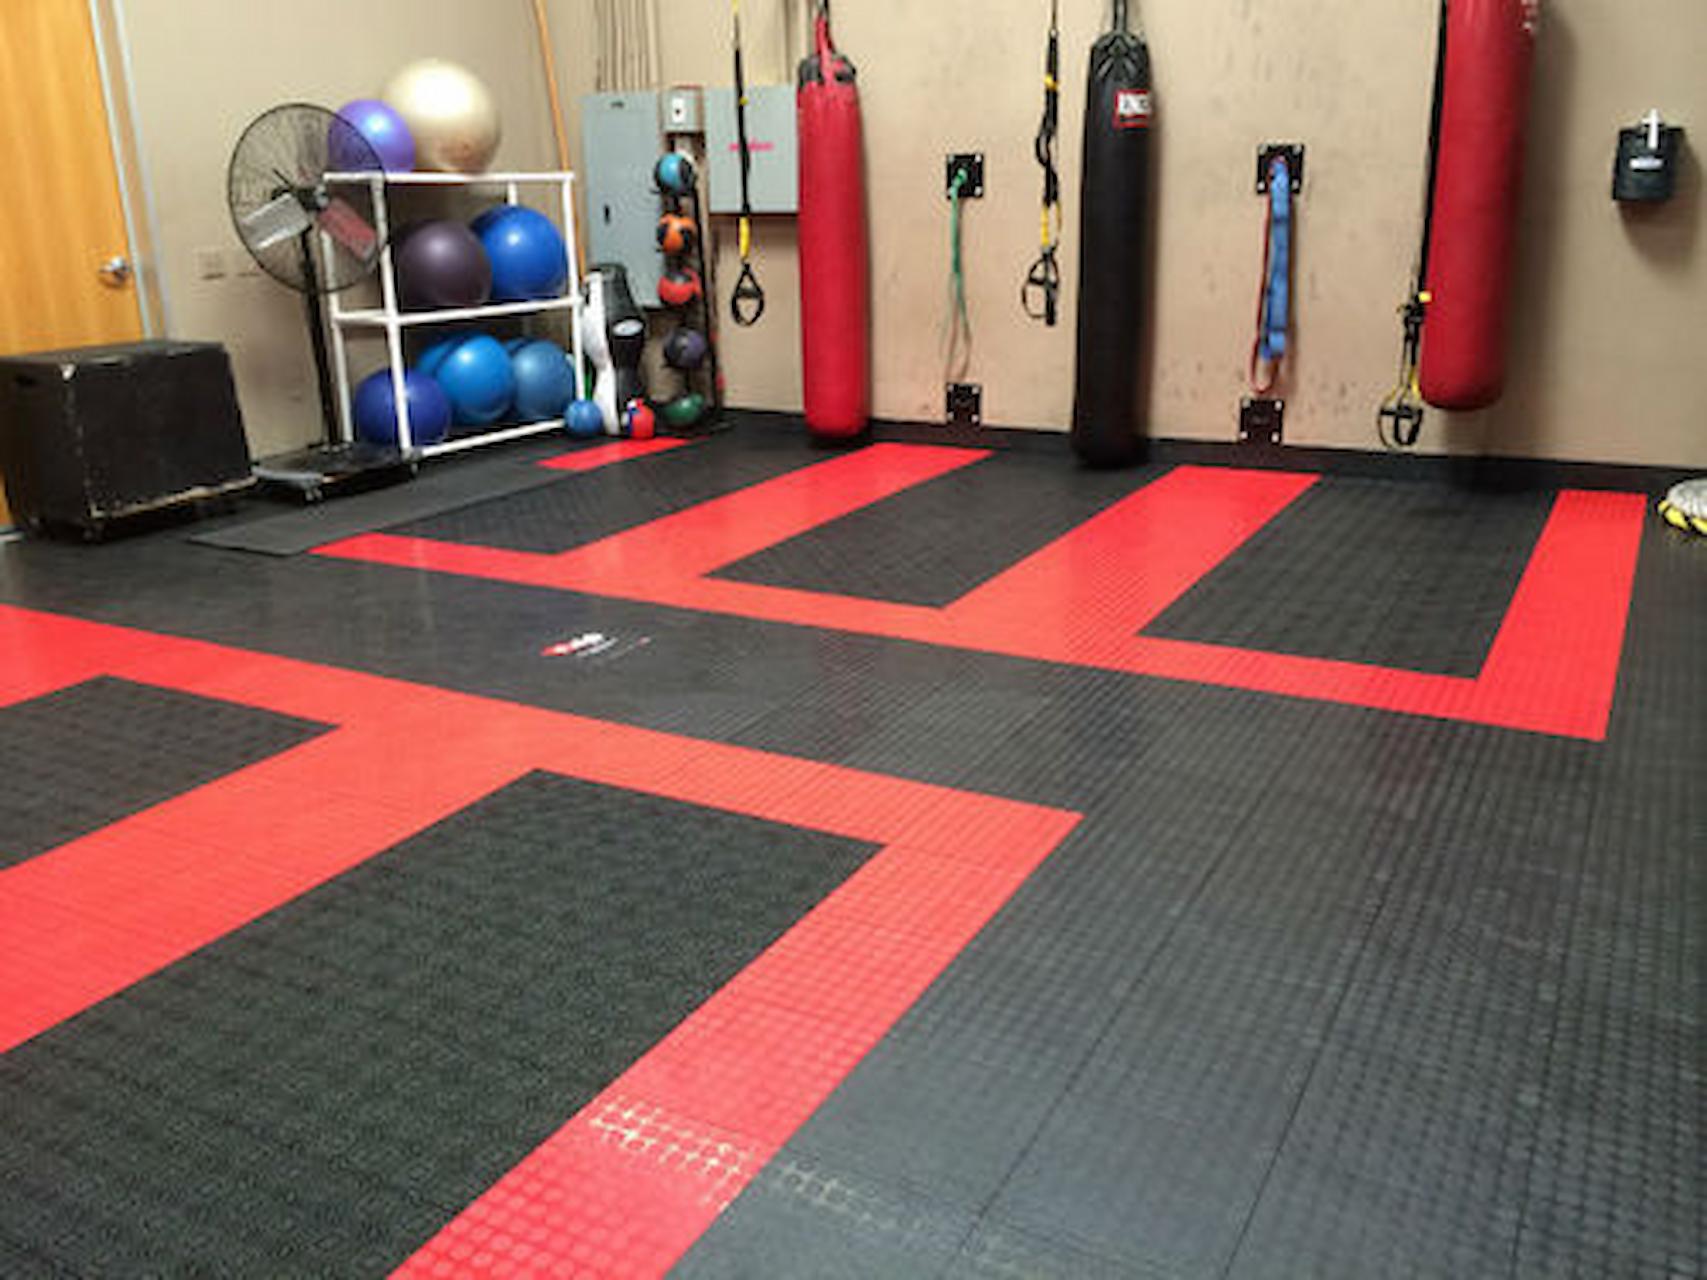 Do You Need Rubber Flooring To Make Your Gym Floor Safer?